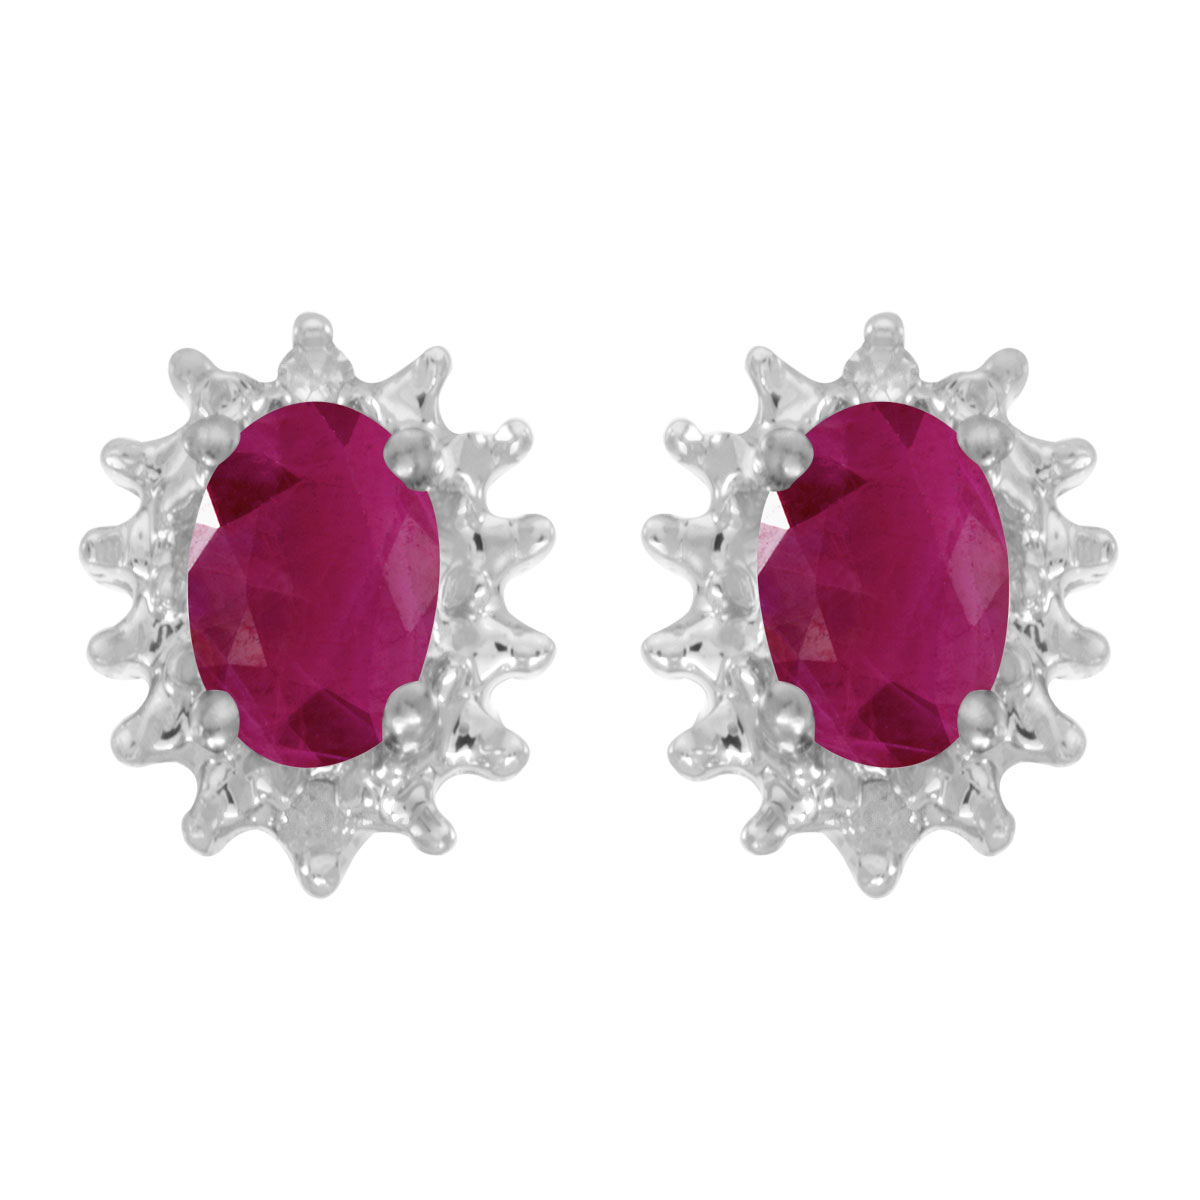 JCX2007: These 14k white gold oval ruby and diamond earrings feature 6x4 mm genuine natural rubys with a 0.72 ct total weight and .04 ct diamonds.